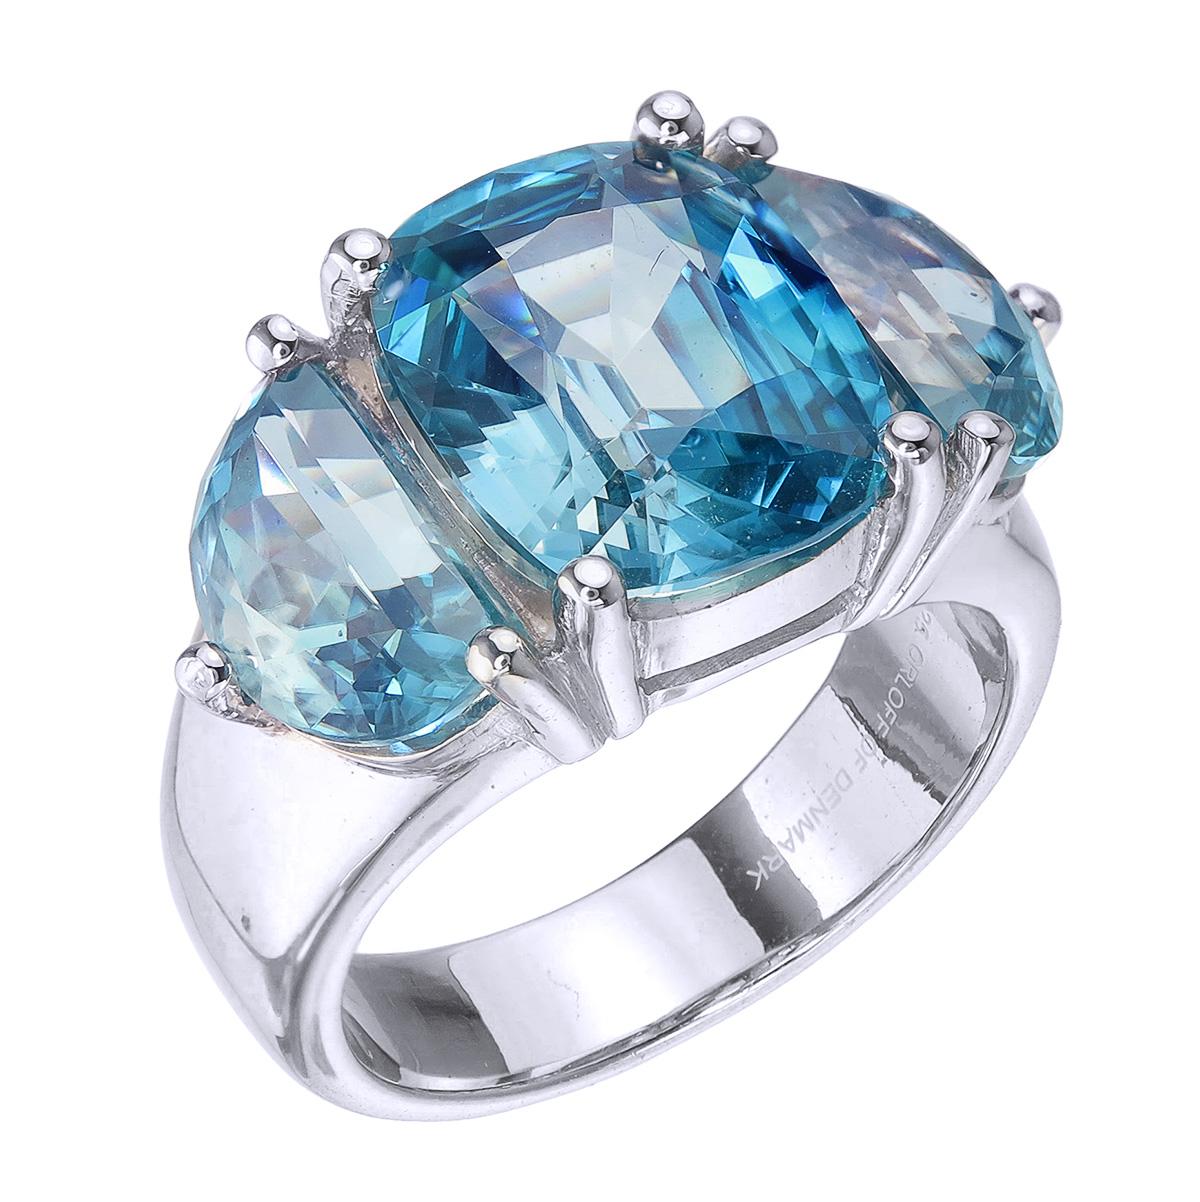 Orloff of Denmark; 925 Sterling Silver Ring set with three Natural Cambodian Blue Zircons totaling to 14.4 carats.

This piece has been meticulously hand-crafted out of 925 sterling silver.
In the center sits a fantastic 7.79 carat ocean blue zircon